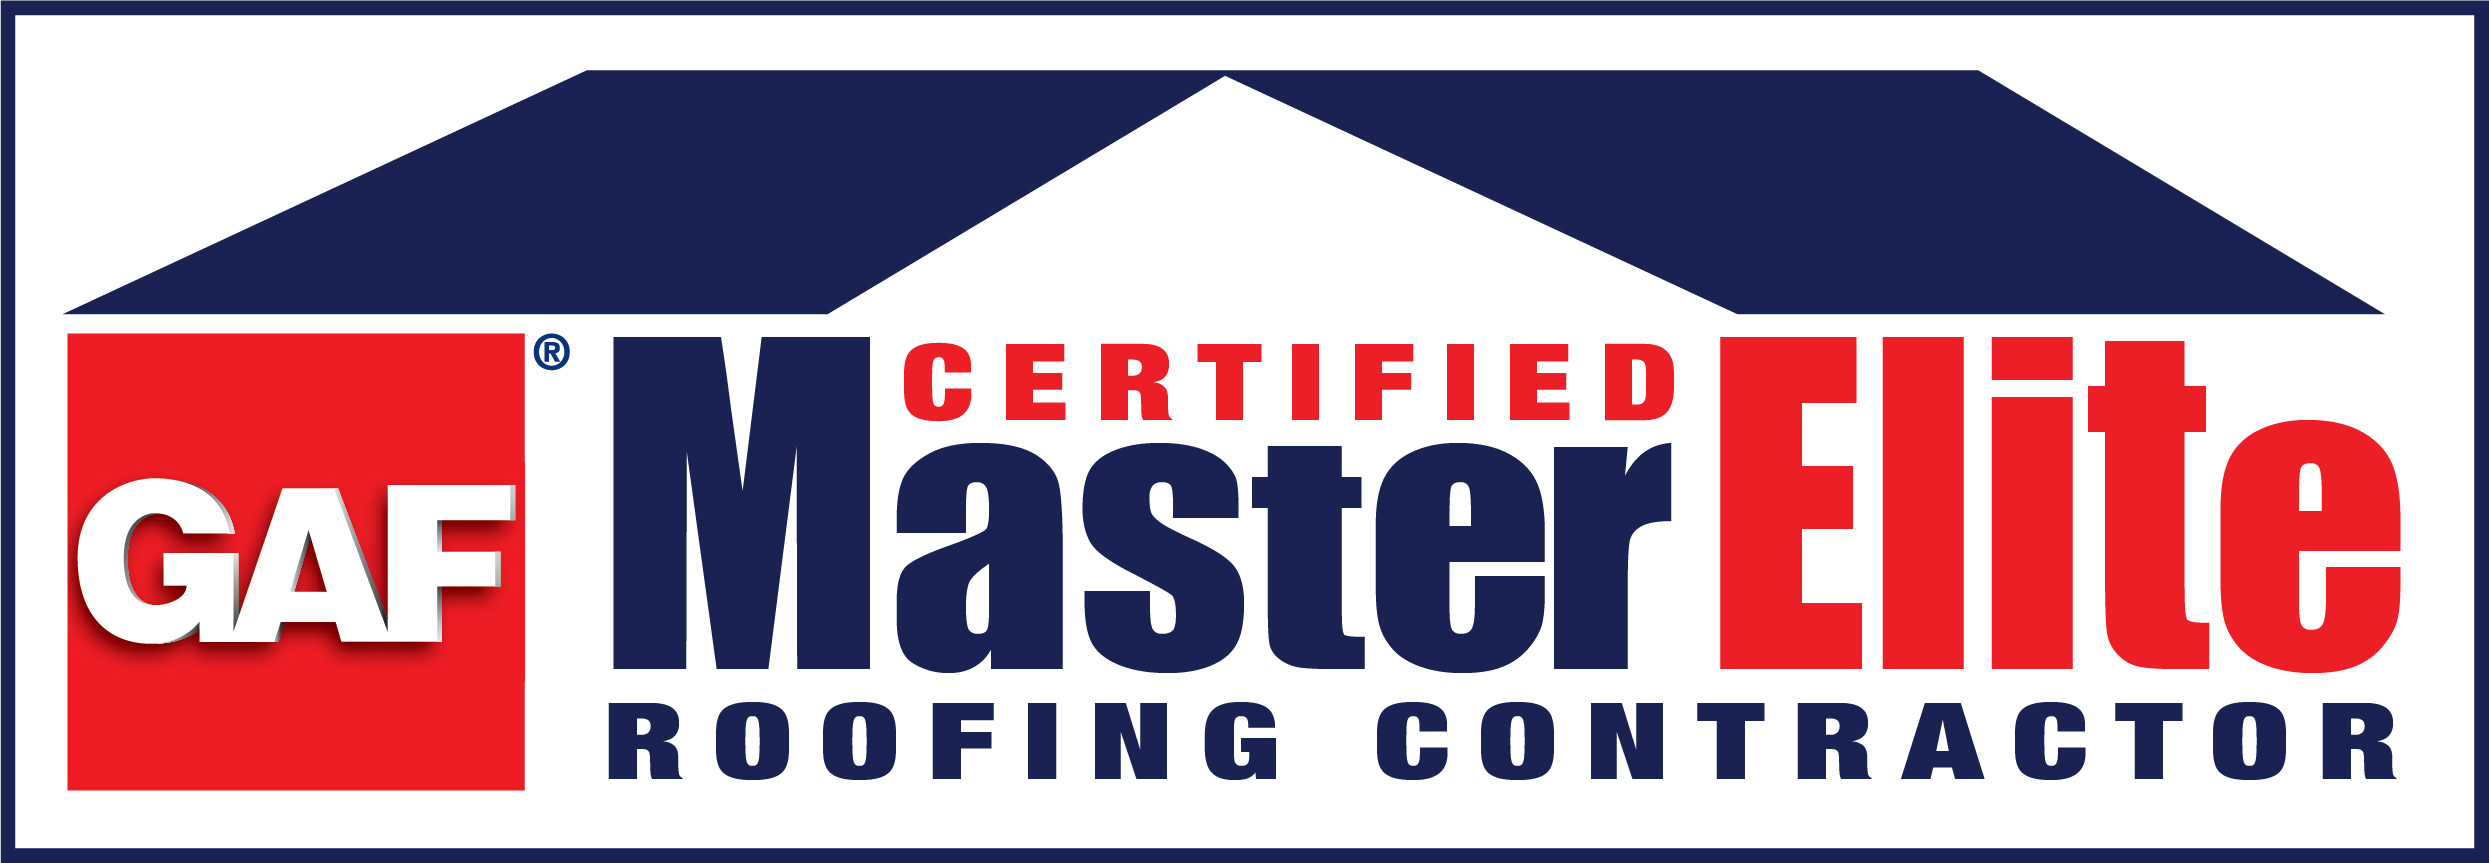 Certainteed Roofing - Certified and Professional Roofers